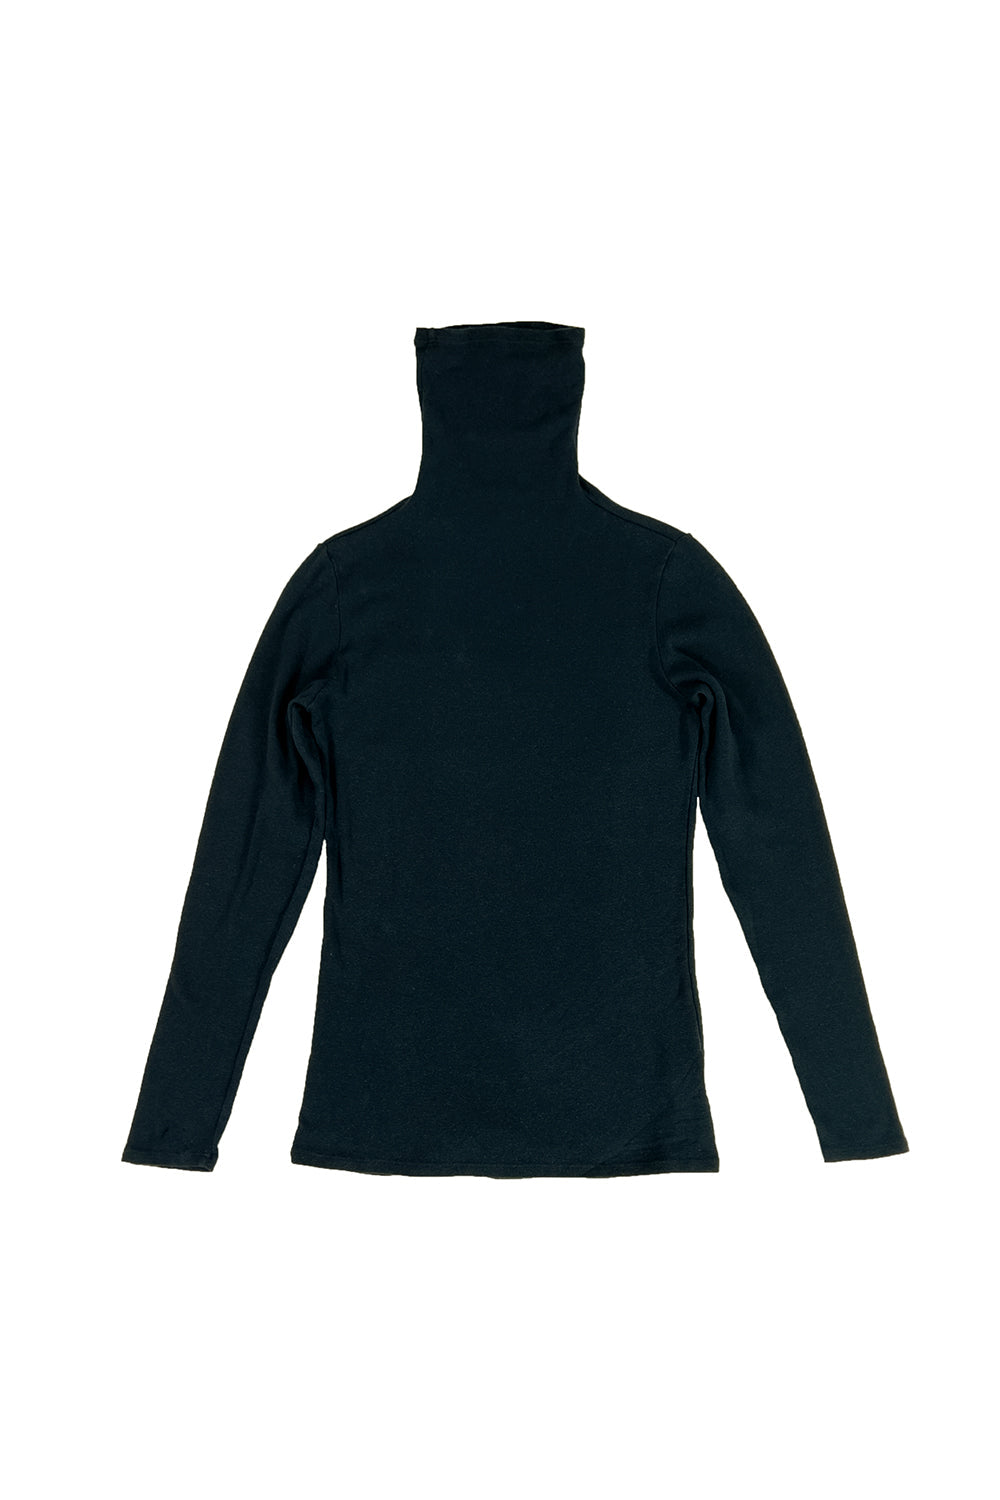 Whidbey Turtleneck in Black